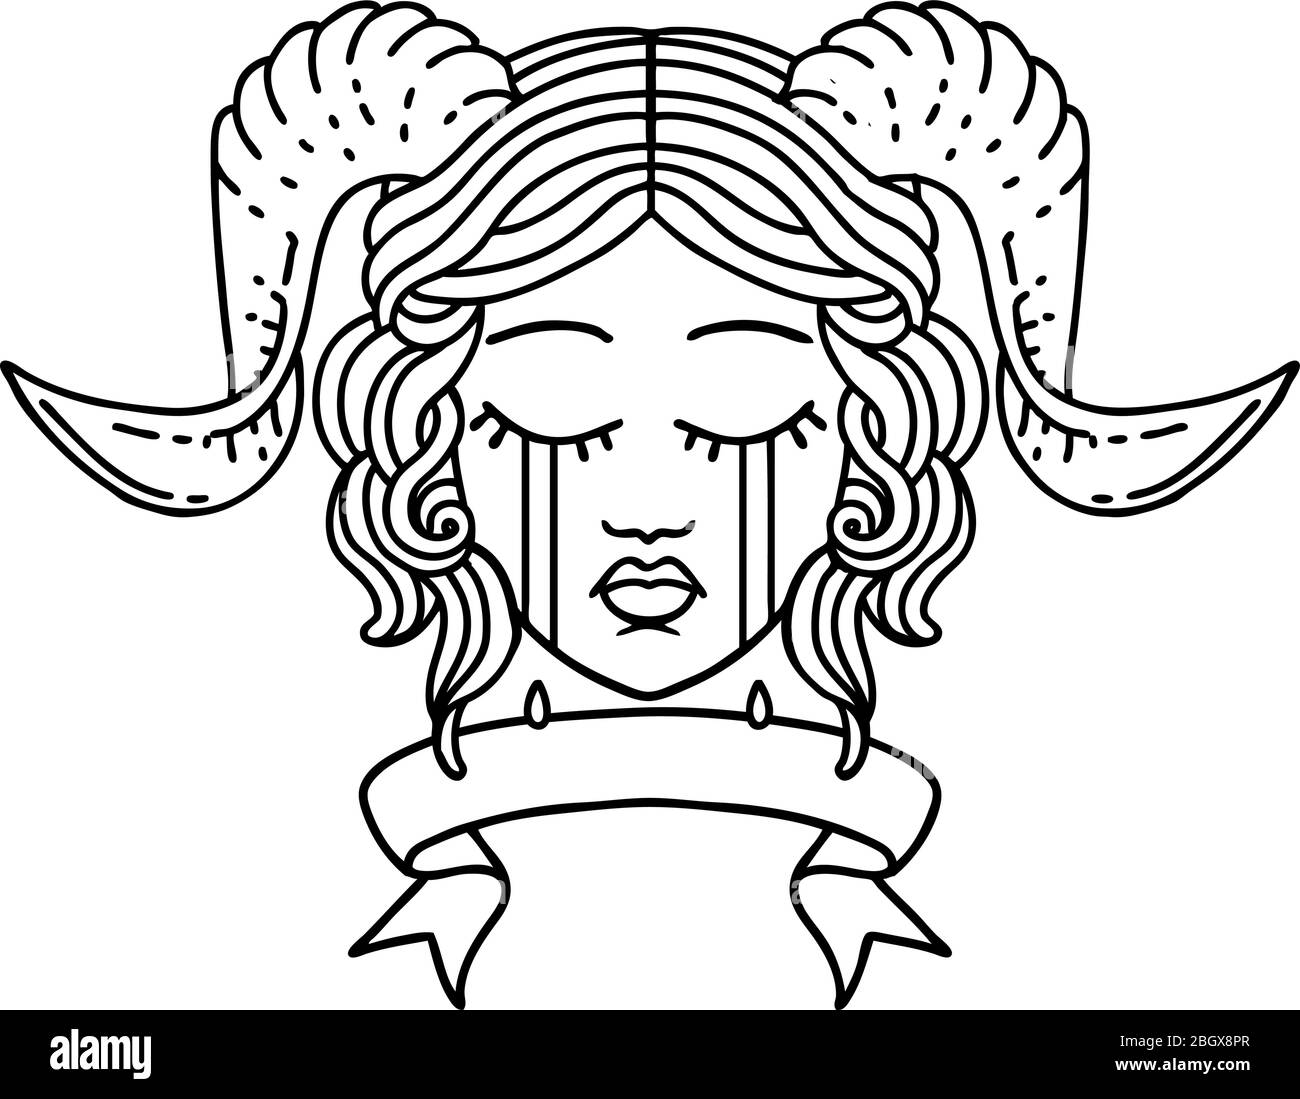 Black and White Tattoo linework Style crying tiefling with scroll ...